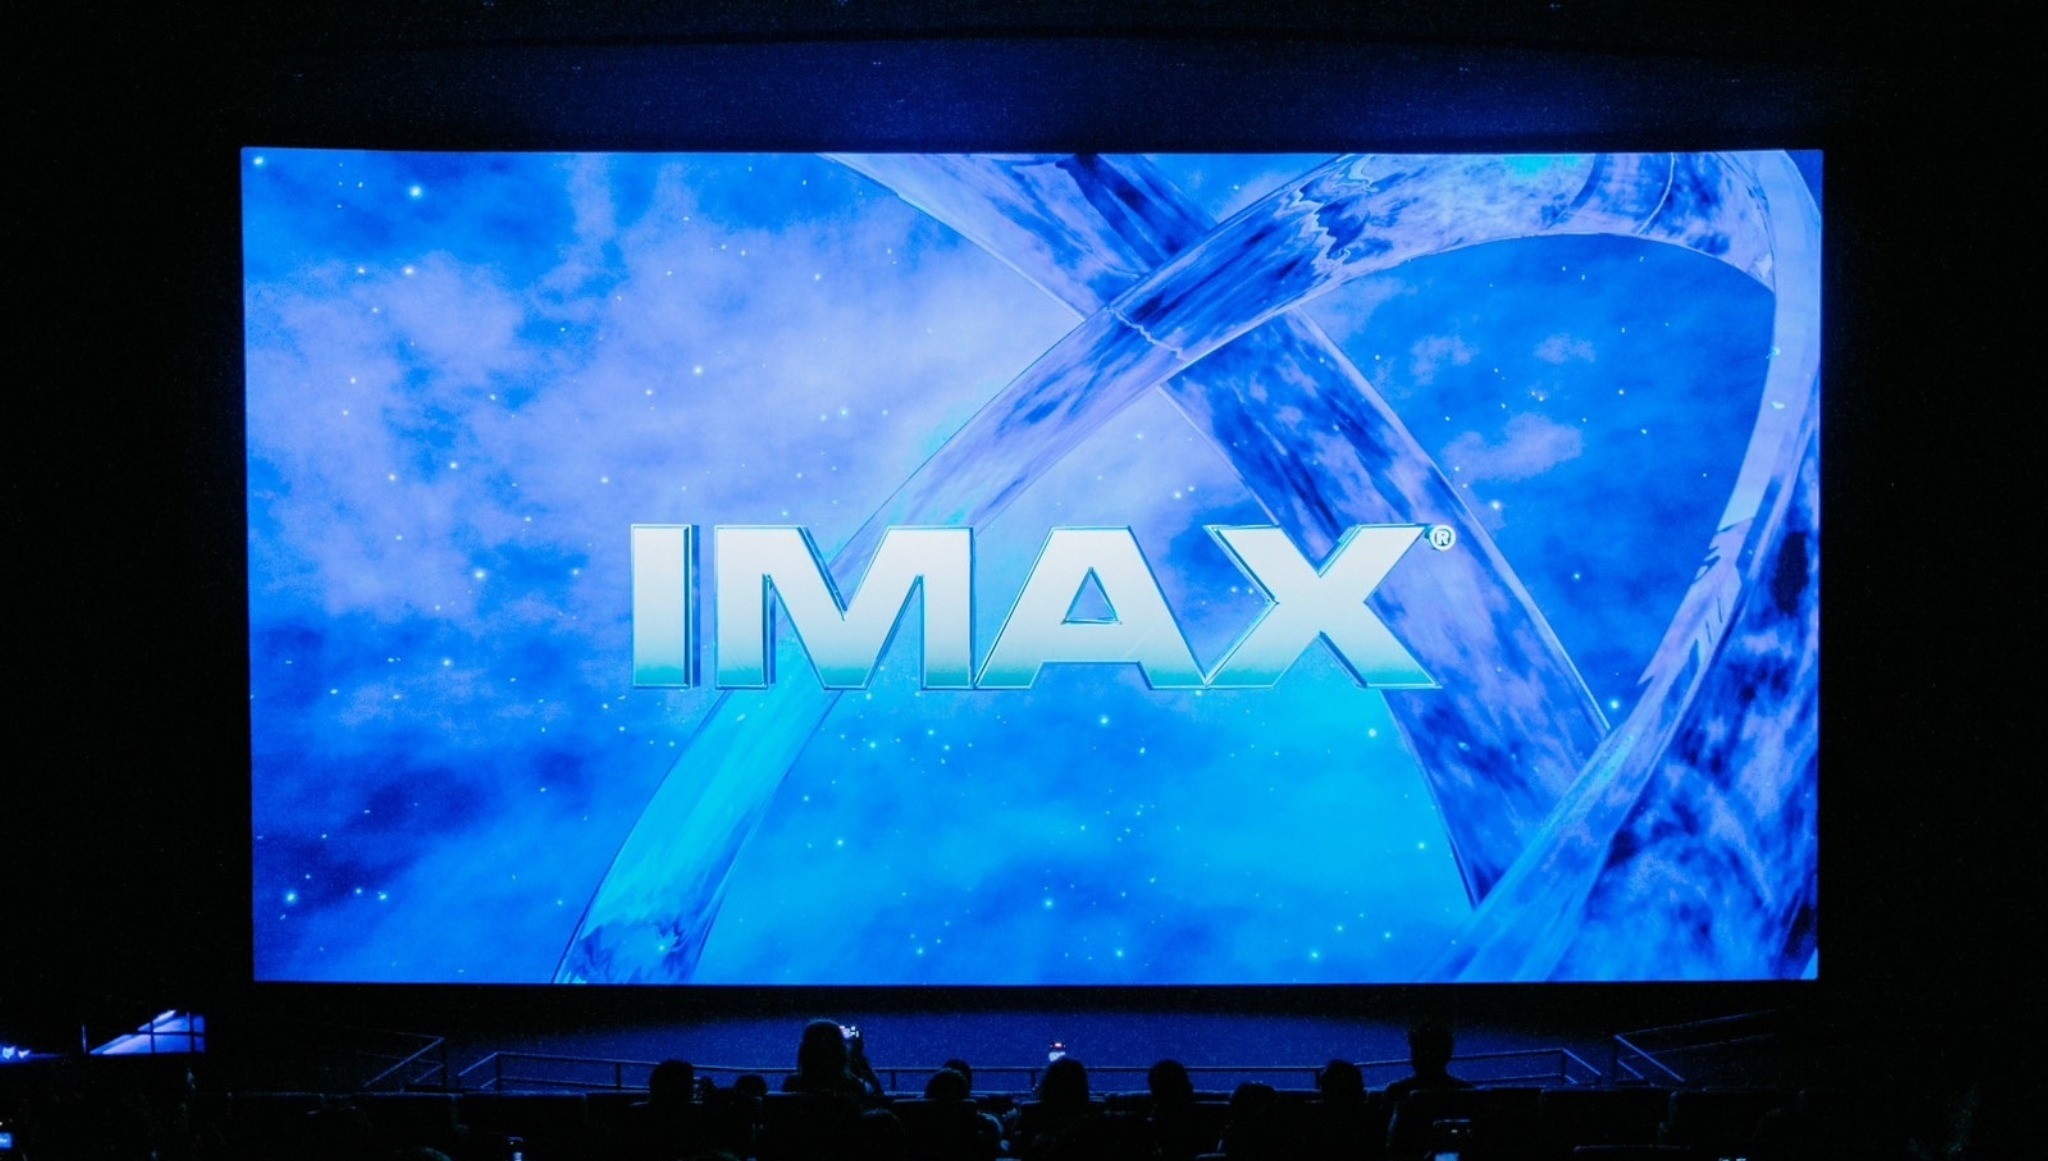 Get ready for epic movie magic: SM Cinema and IMAX expand partnership